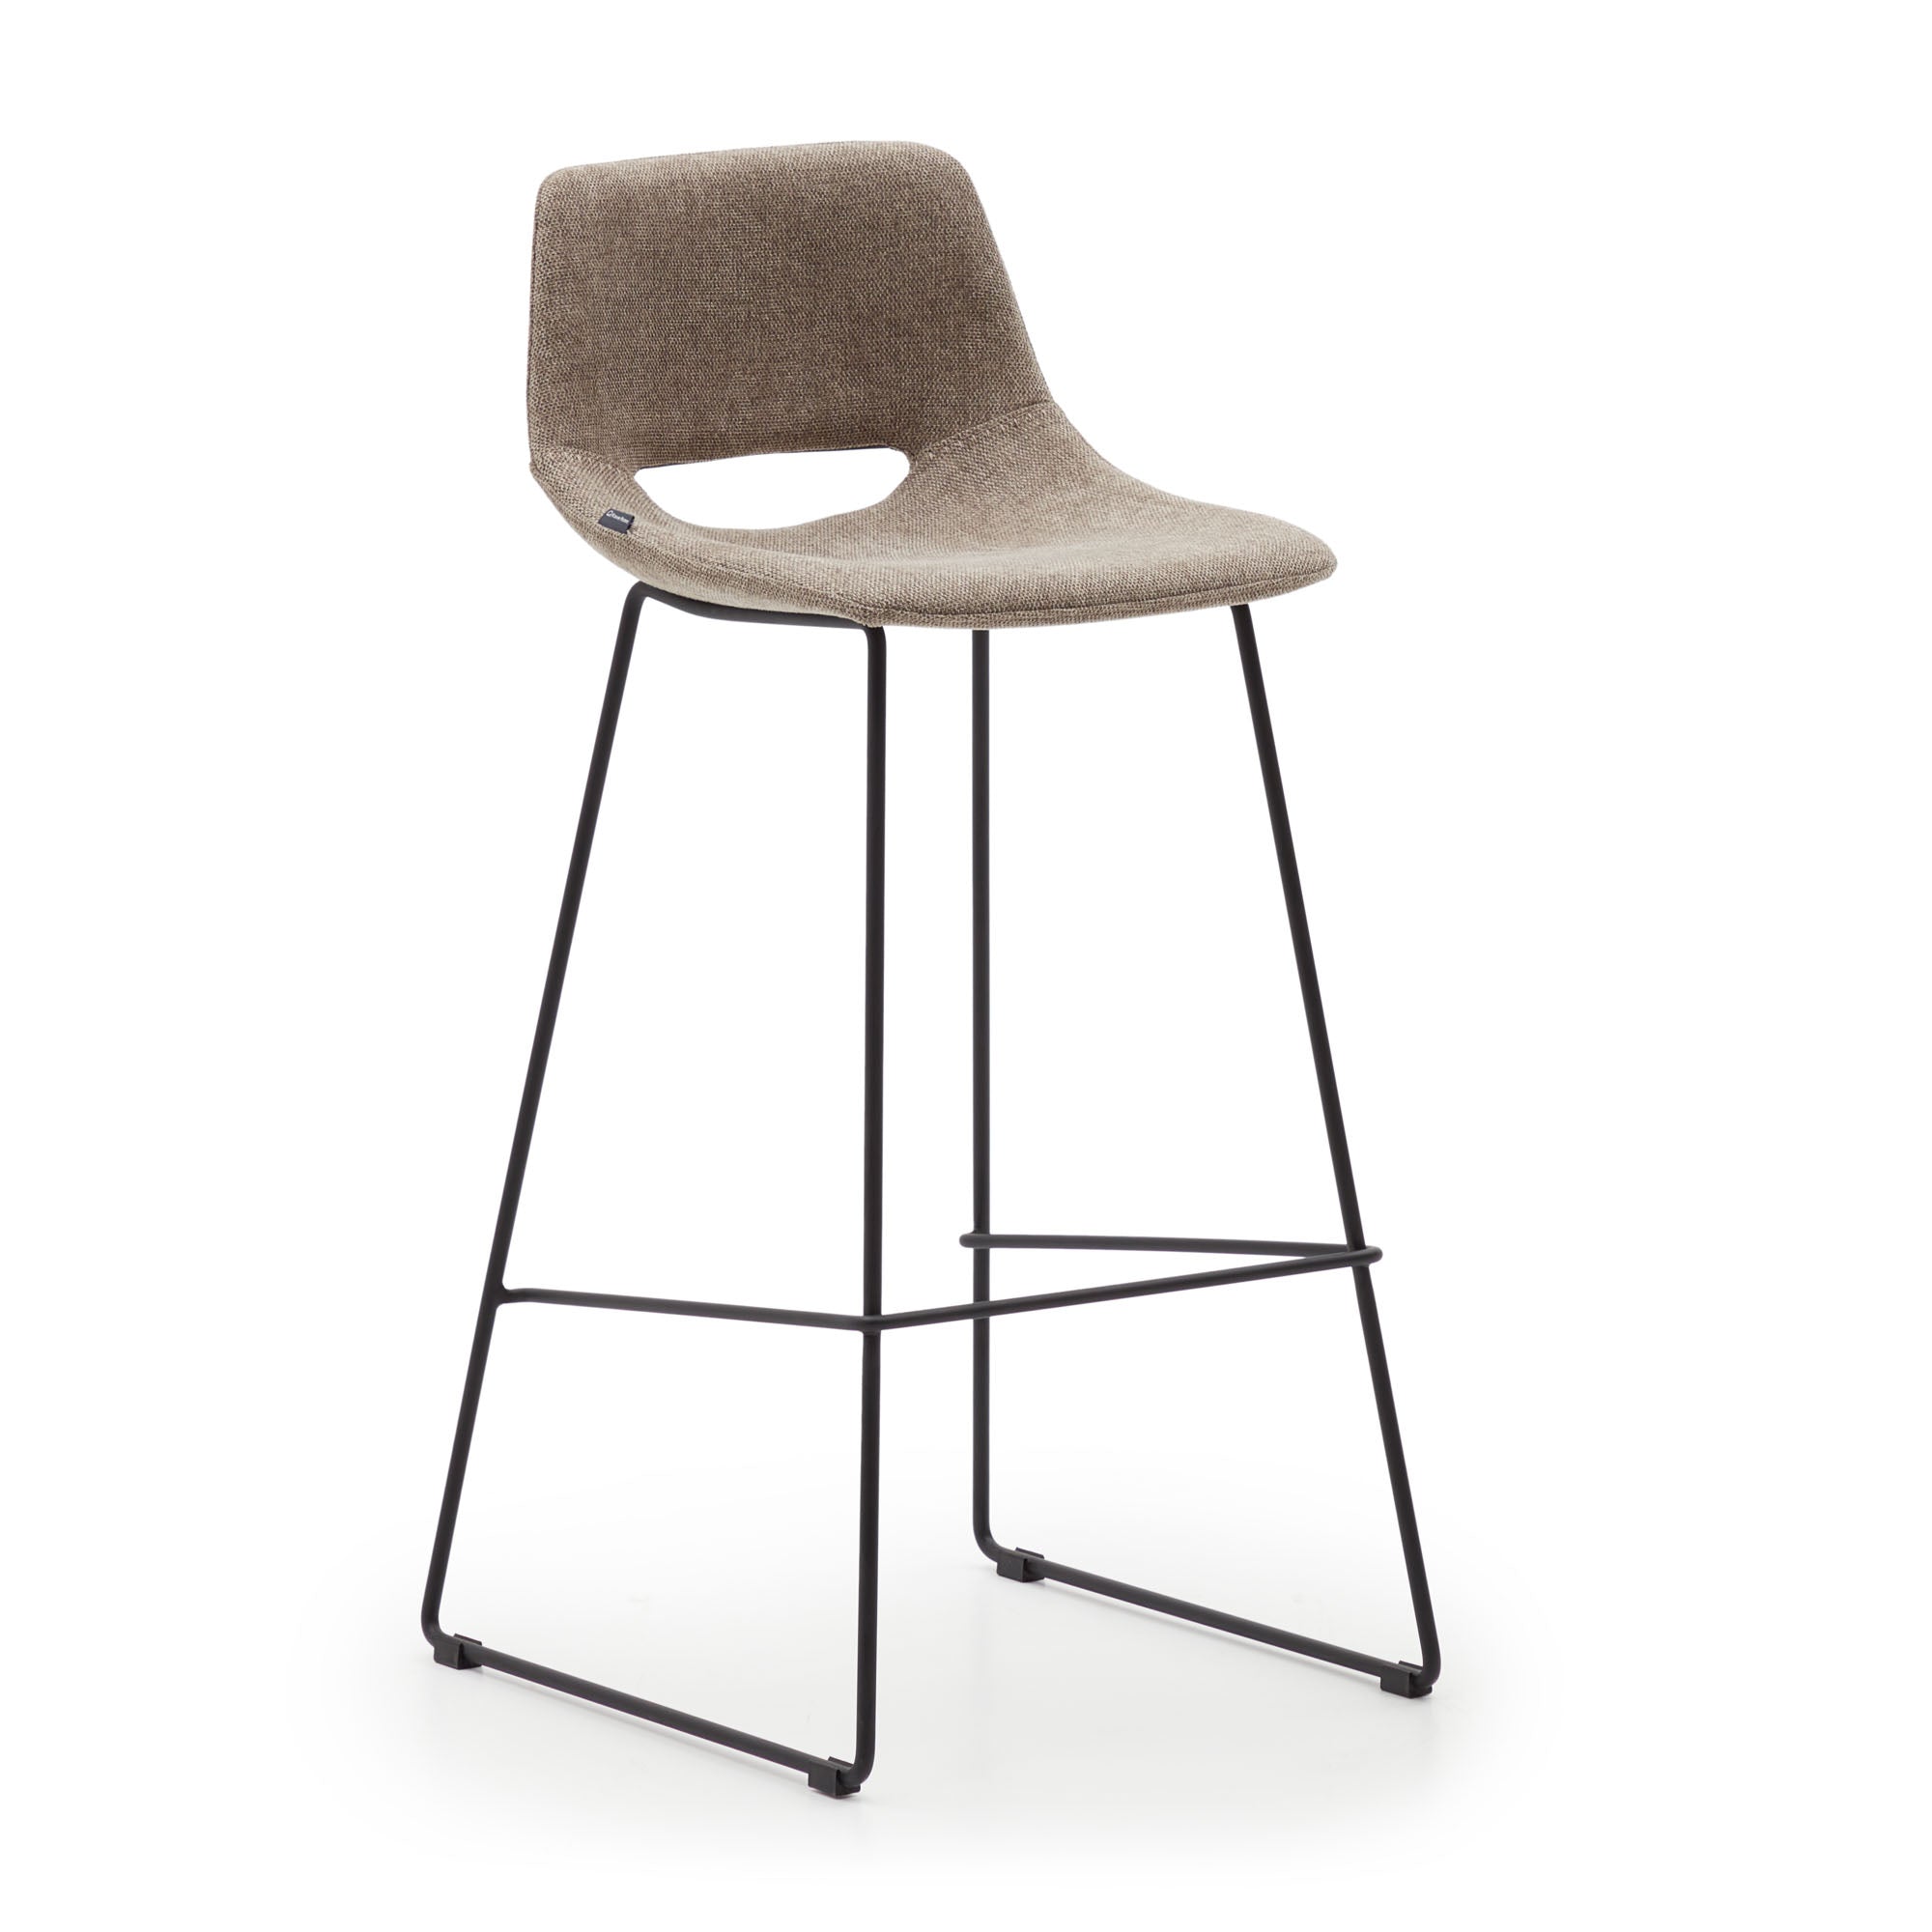 Zahara bar stool in brown with steel legs in black finish, height 76 cm